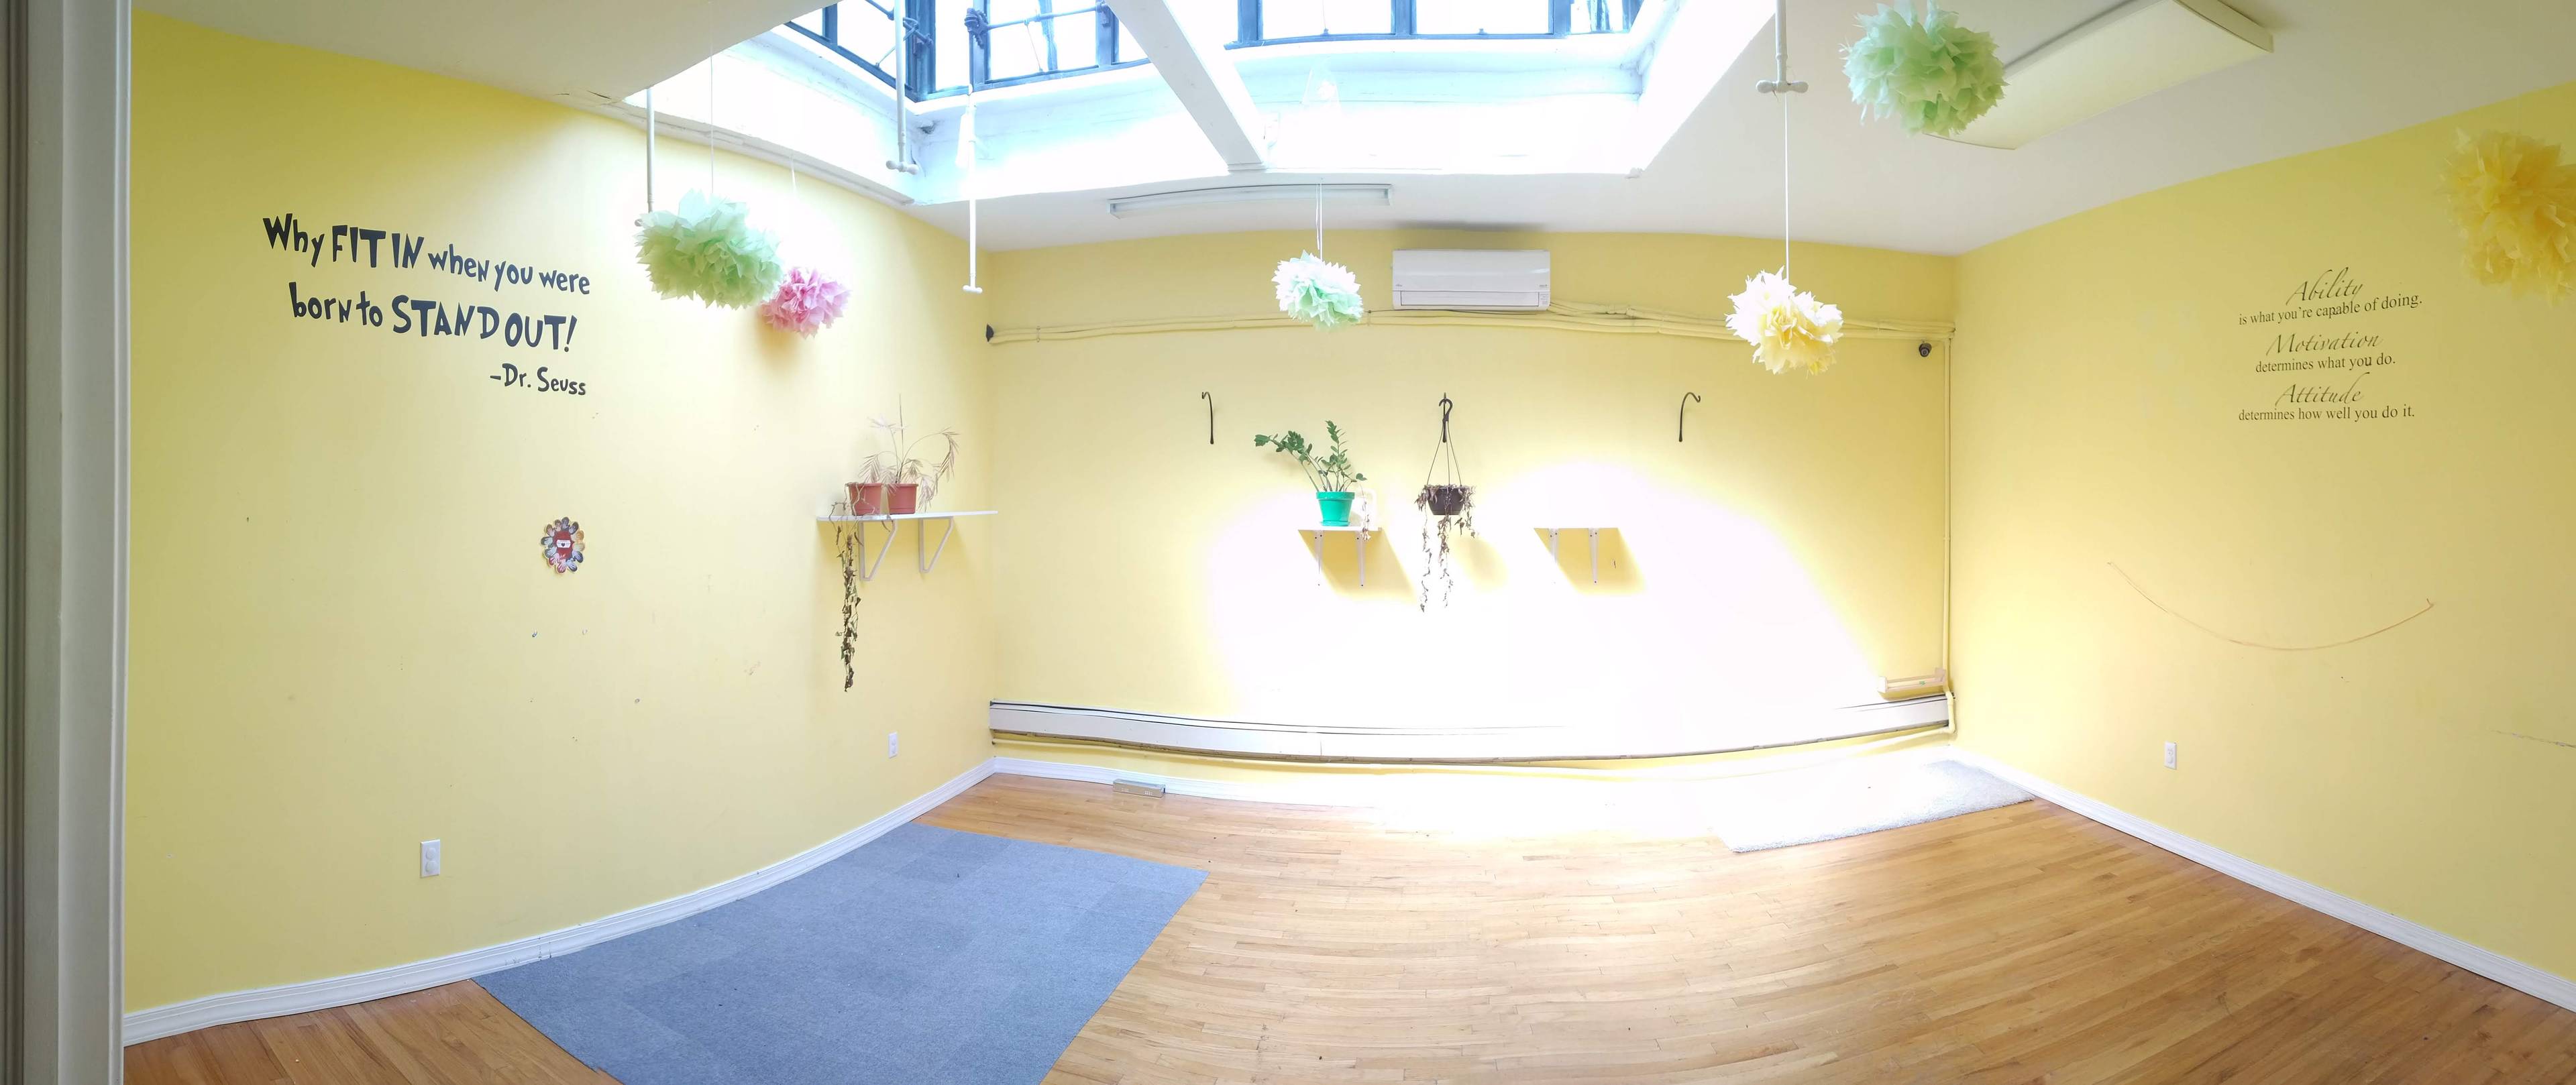 2500sqft Park Slope business  - preschool setup already in place - great light and location